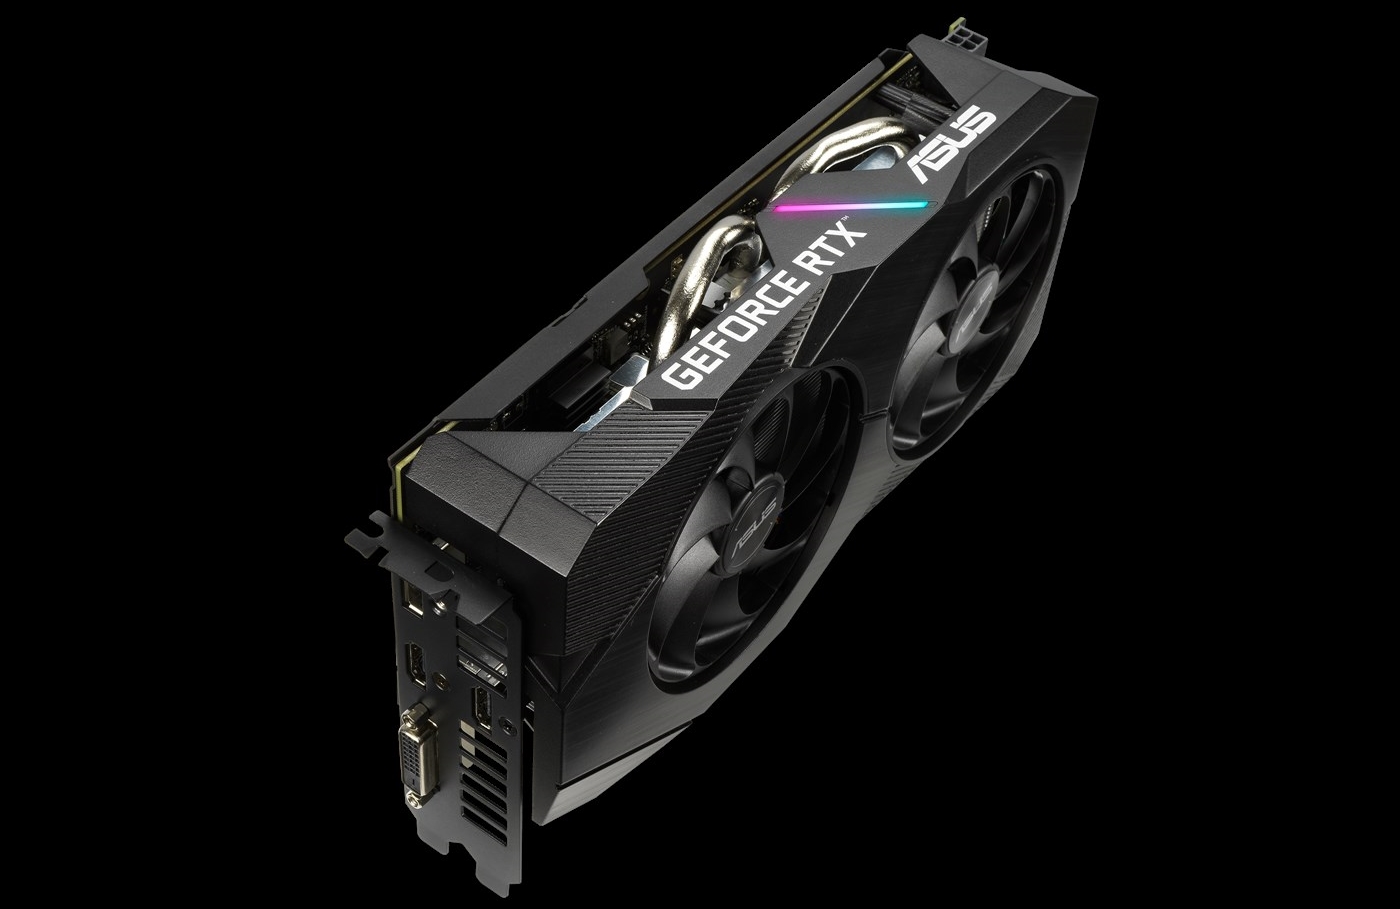 Geforce rtx 6 gb. ASUS RTX 2060. RTX 2060 ASUS Dual. ASUS Dual GEFORCE RTX 2060 EVO [Dual-rtx2060-6g-EVO]. ASUS RTX 2060 6gb.